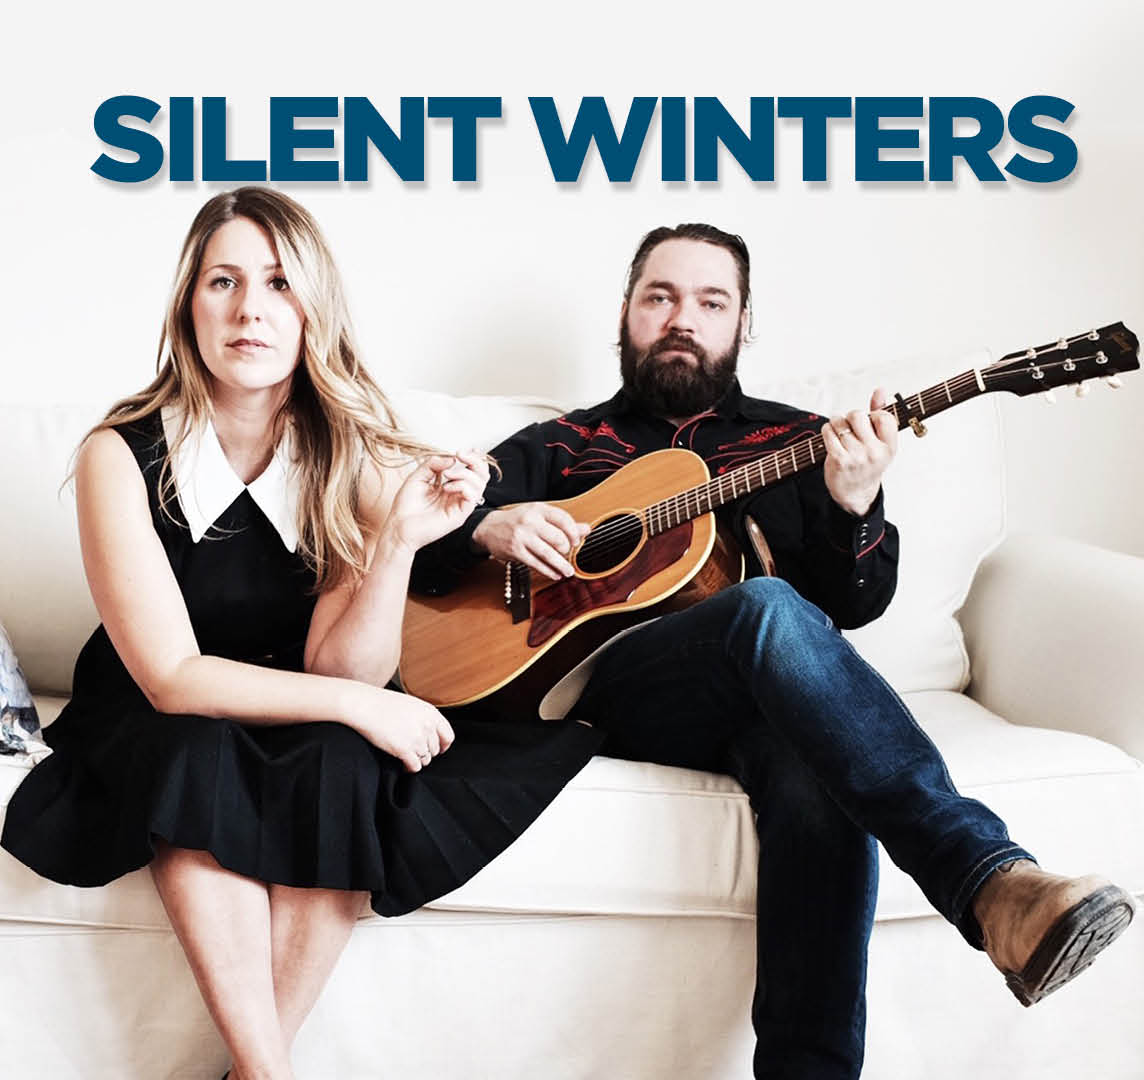 Silent Winters - image of two musicians sitting on a sofa with white background